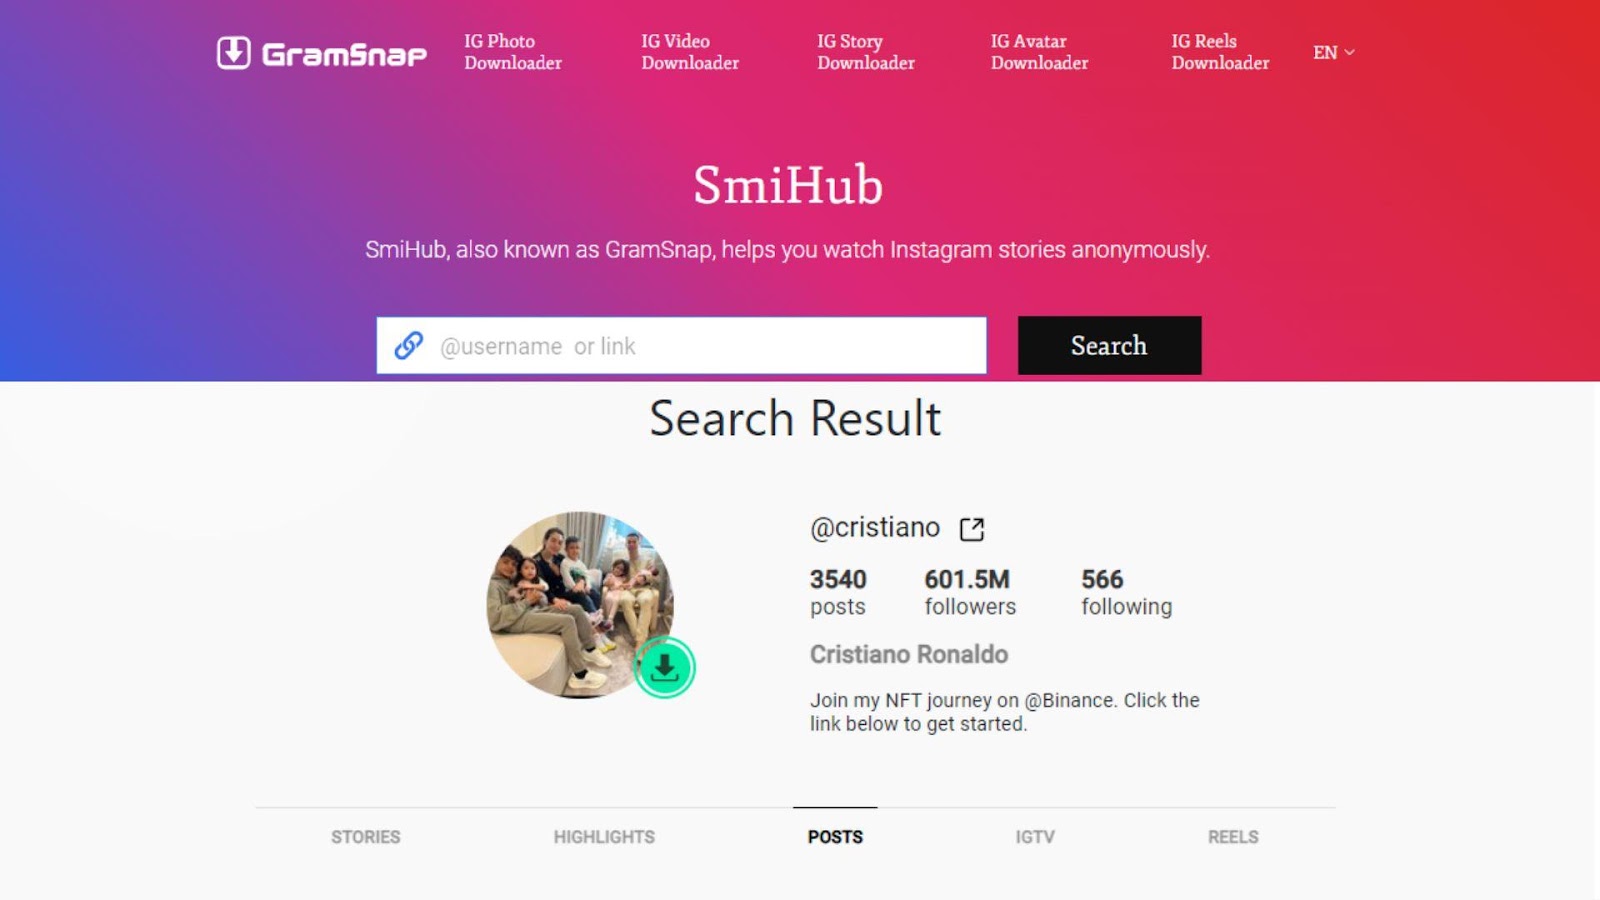 How to View and Download Instagram Content from Smihub?